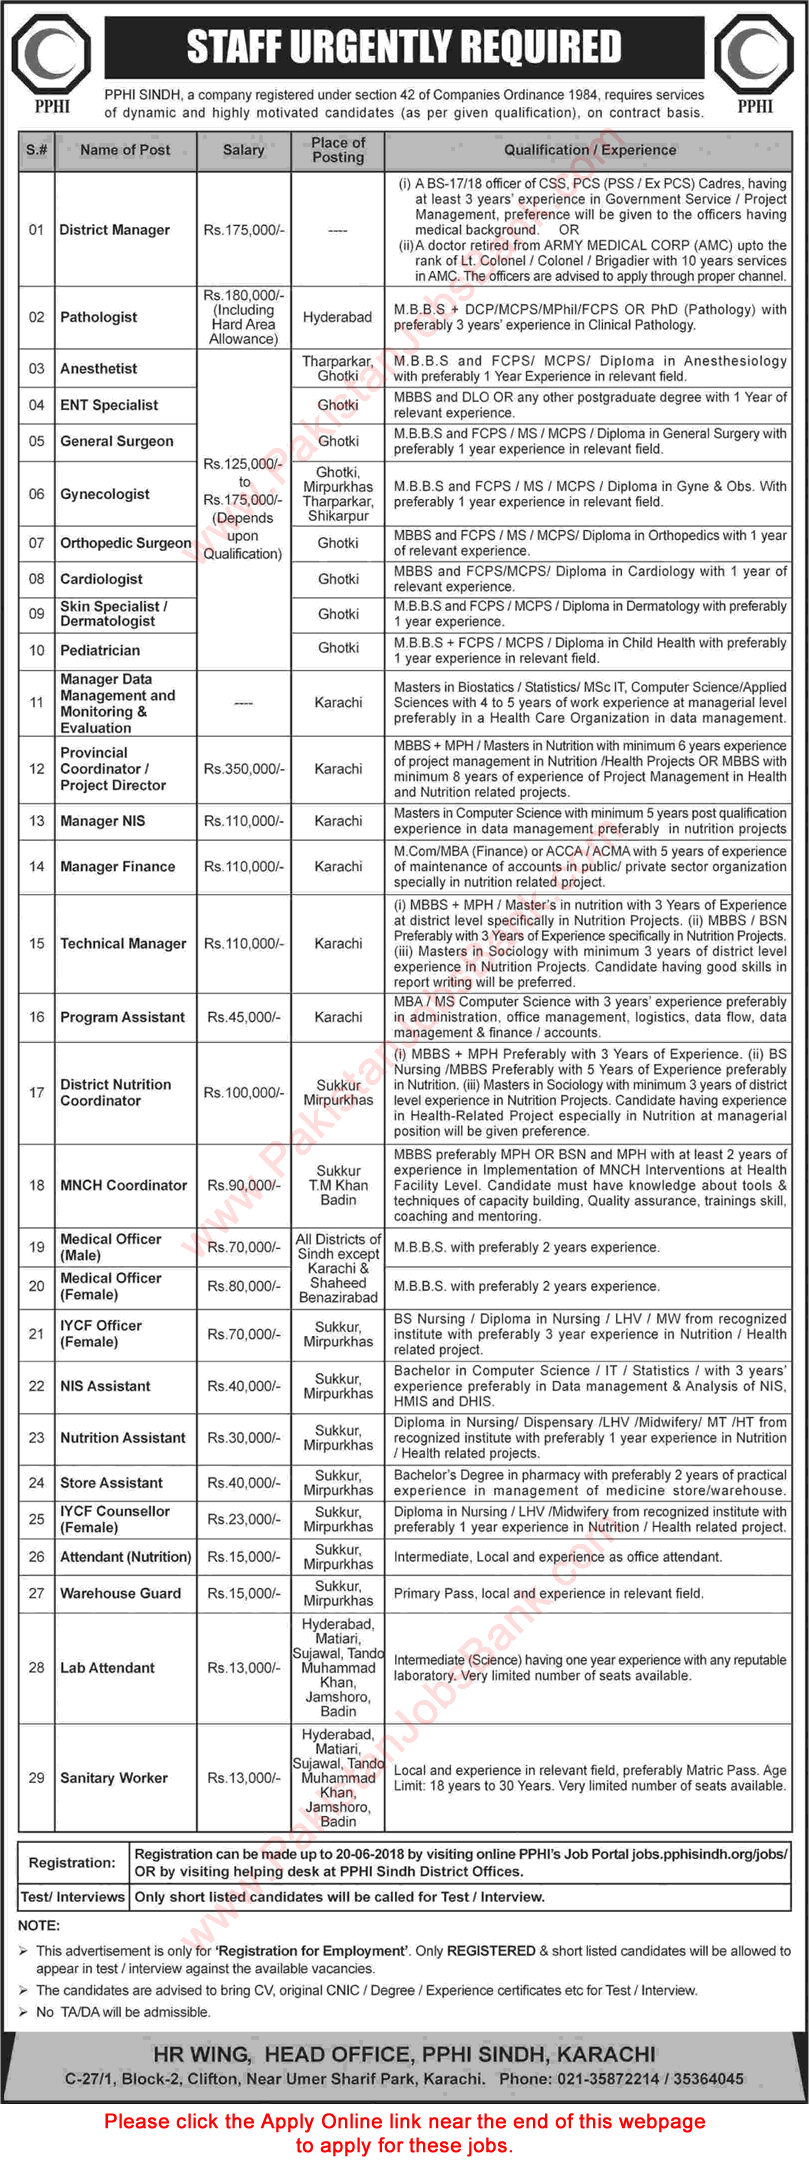 PPHI Sindh Jobs June 2018 Apply Online Medical Officers, Specialist Doctors, Lab Attendants & Others Latest